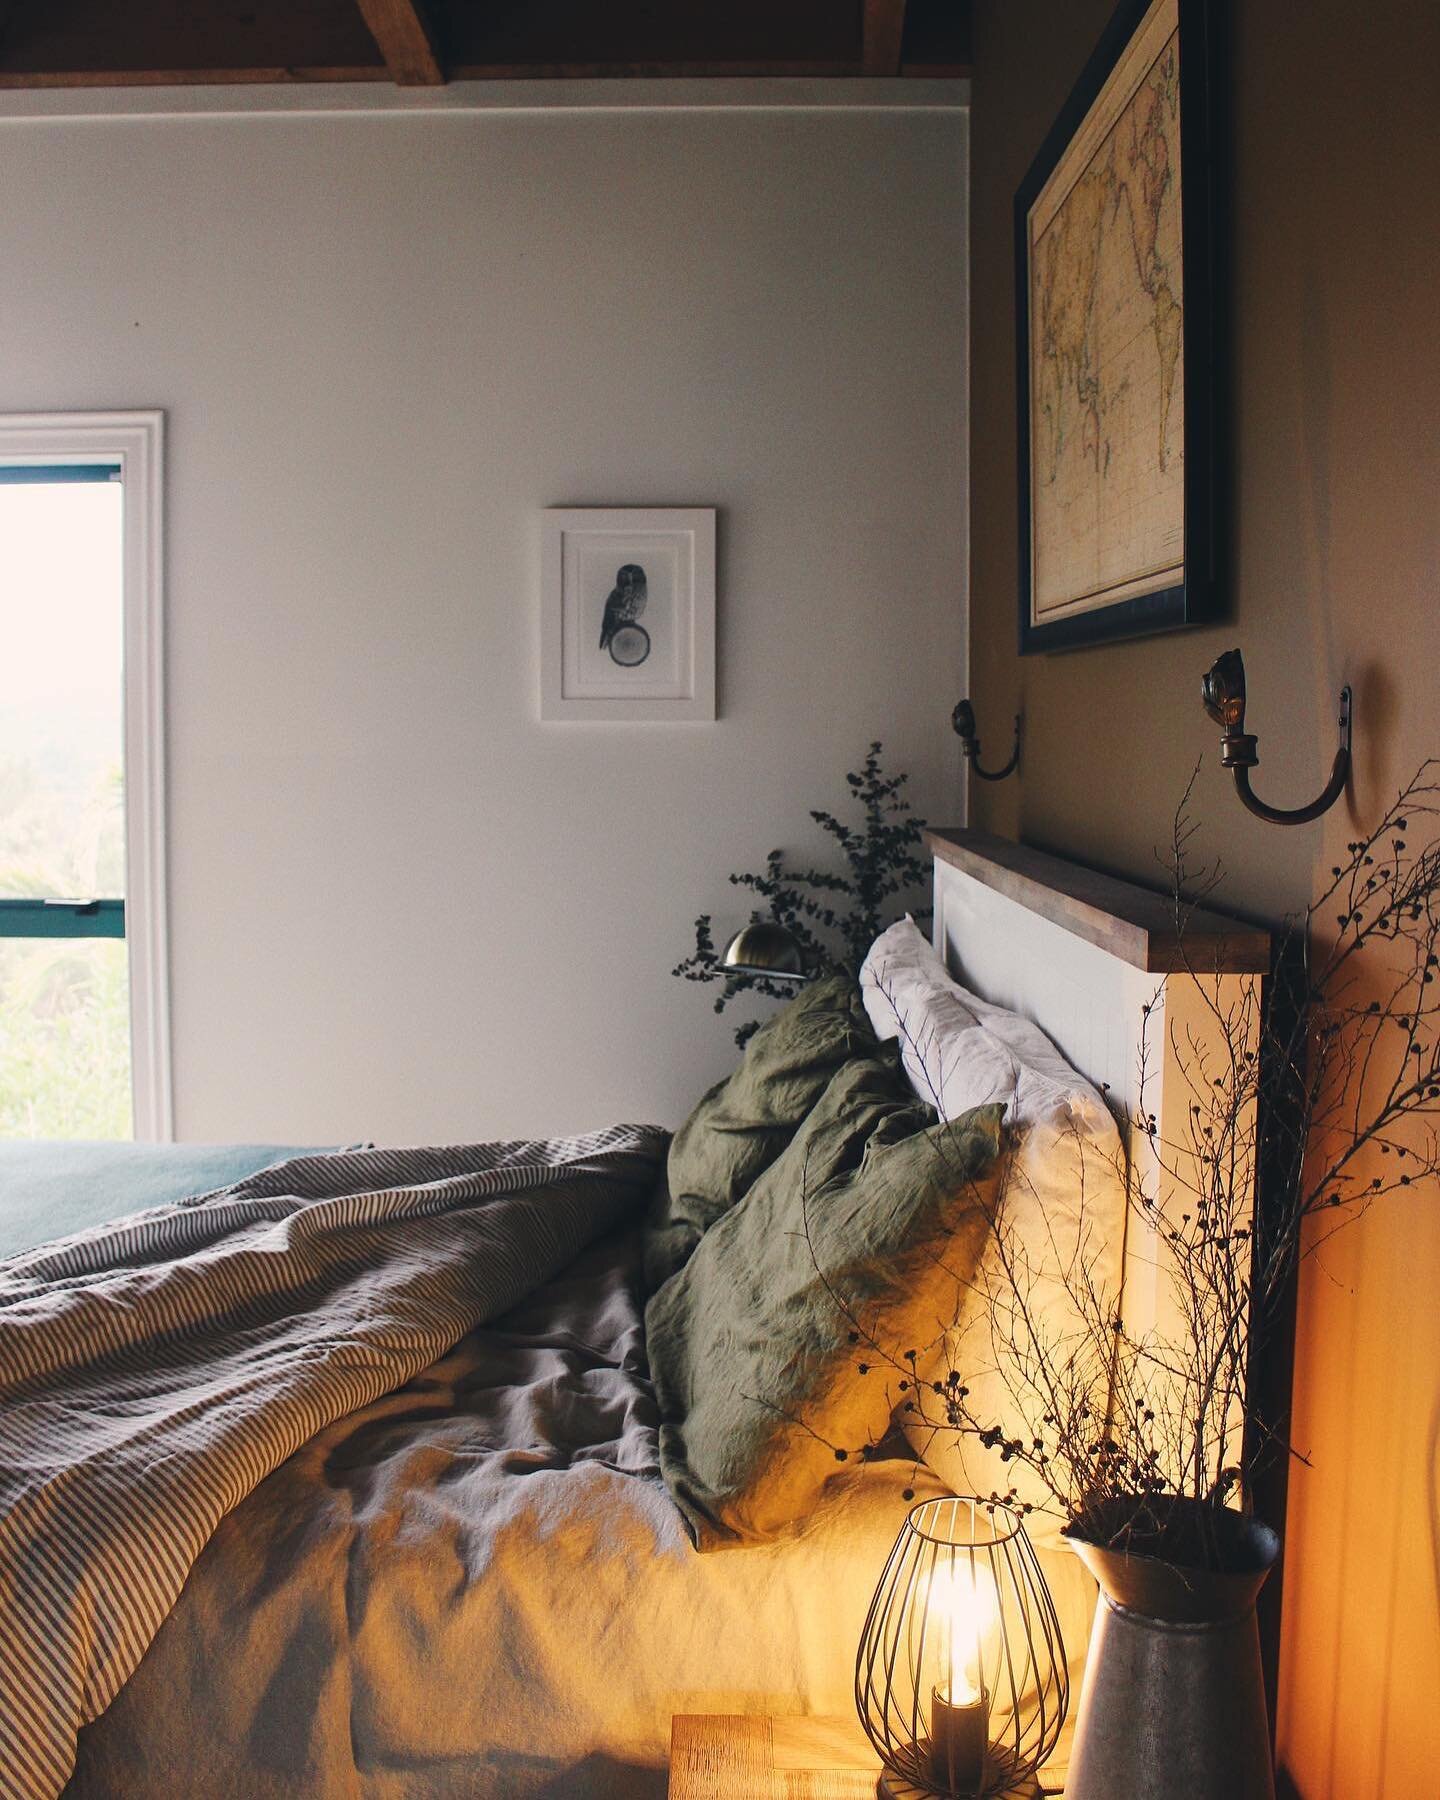 Dreaming of falling into this cosy goodness after a day of exploring beautiful Northland? We are so excited to be opening for bookings later this week - just in time for summer! Stay tuned for updates 🌳

#slowstays #cabins #airbnb #accomodation #esc